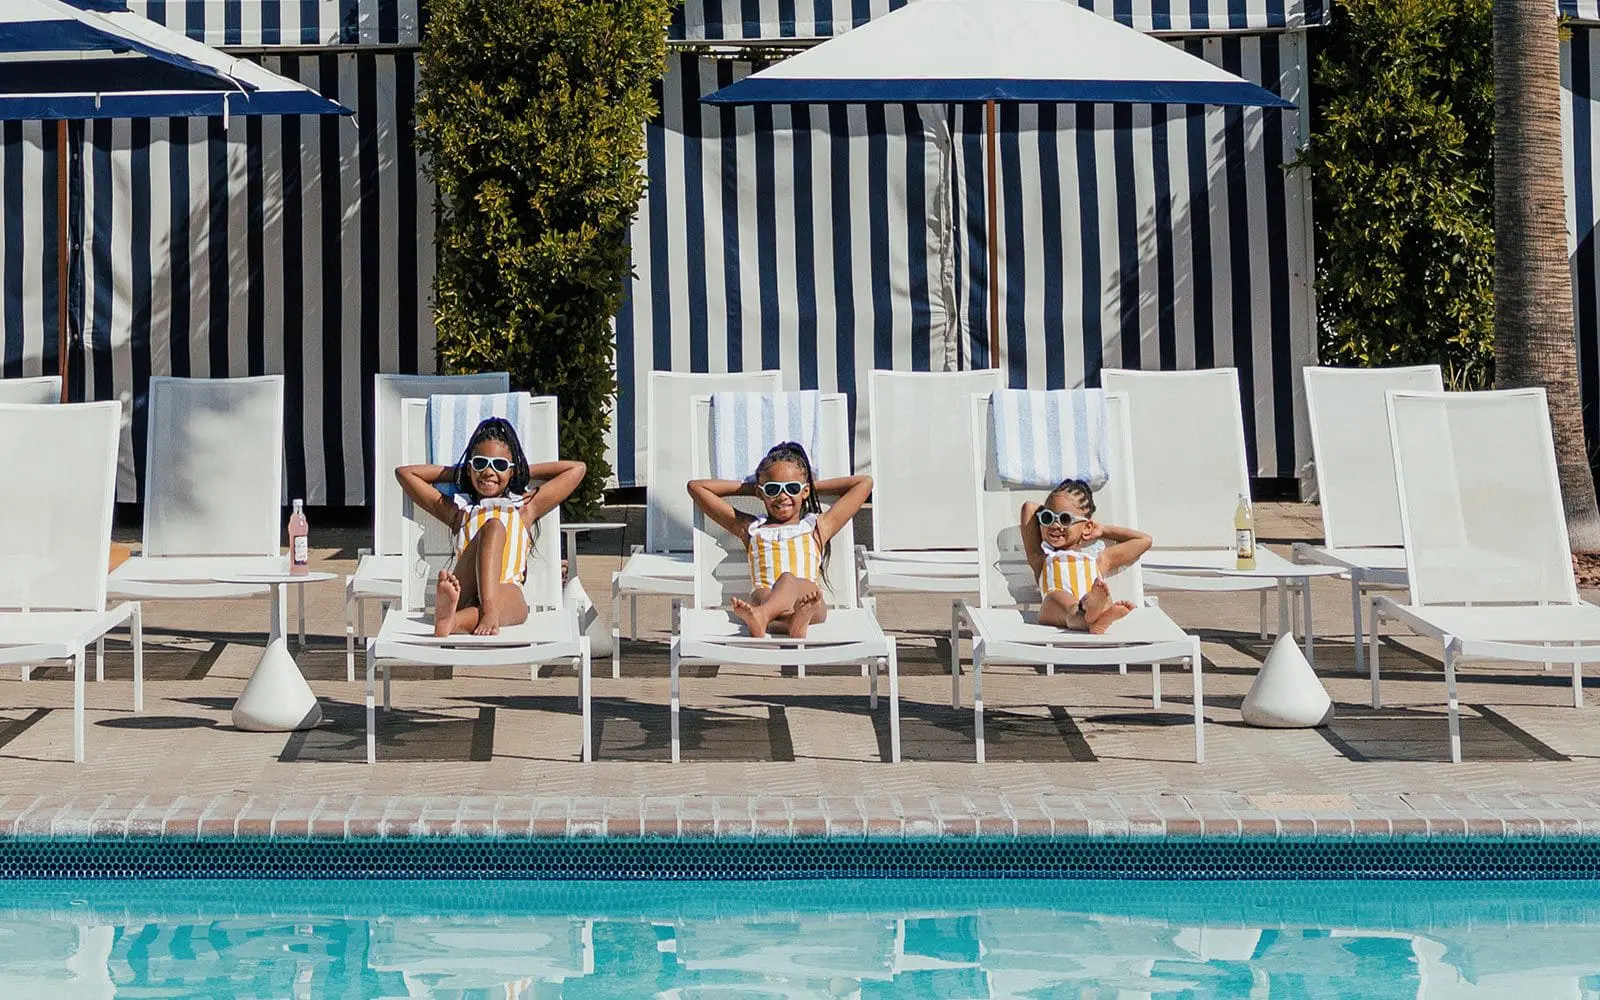 Three girls lounging by the pool